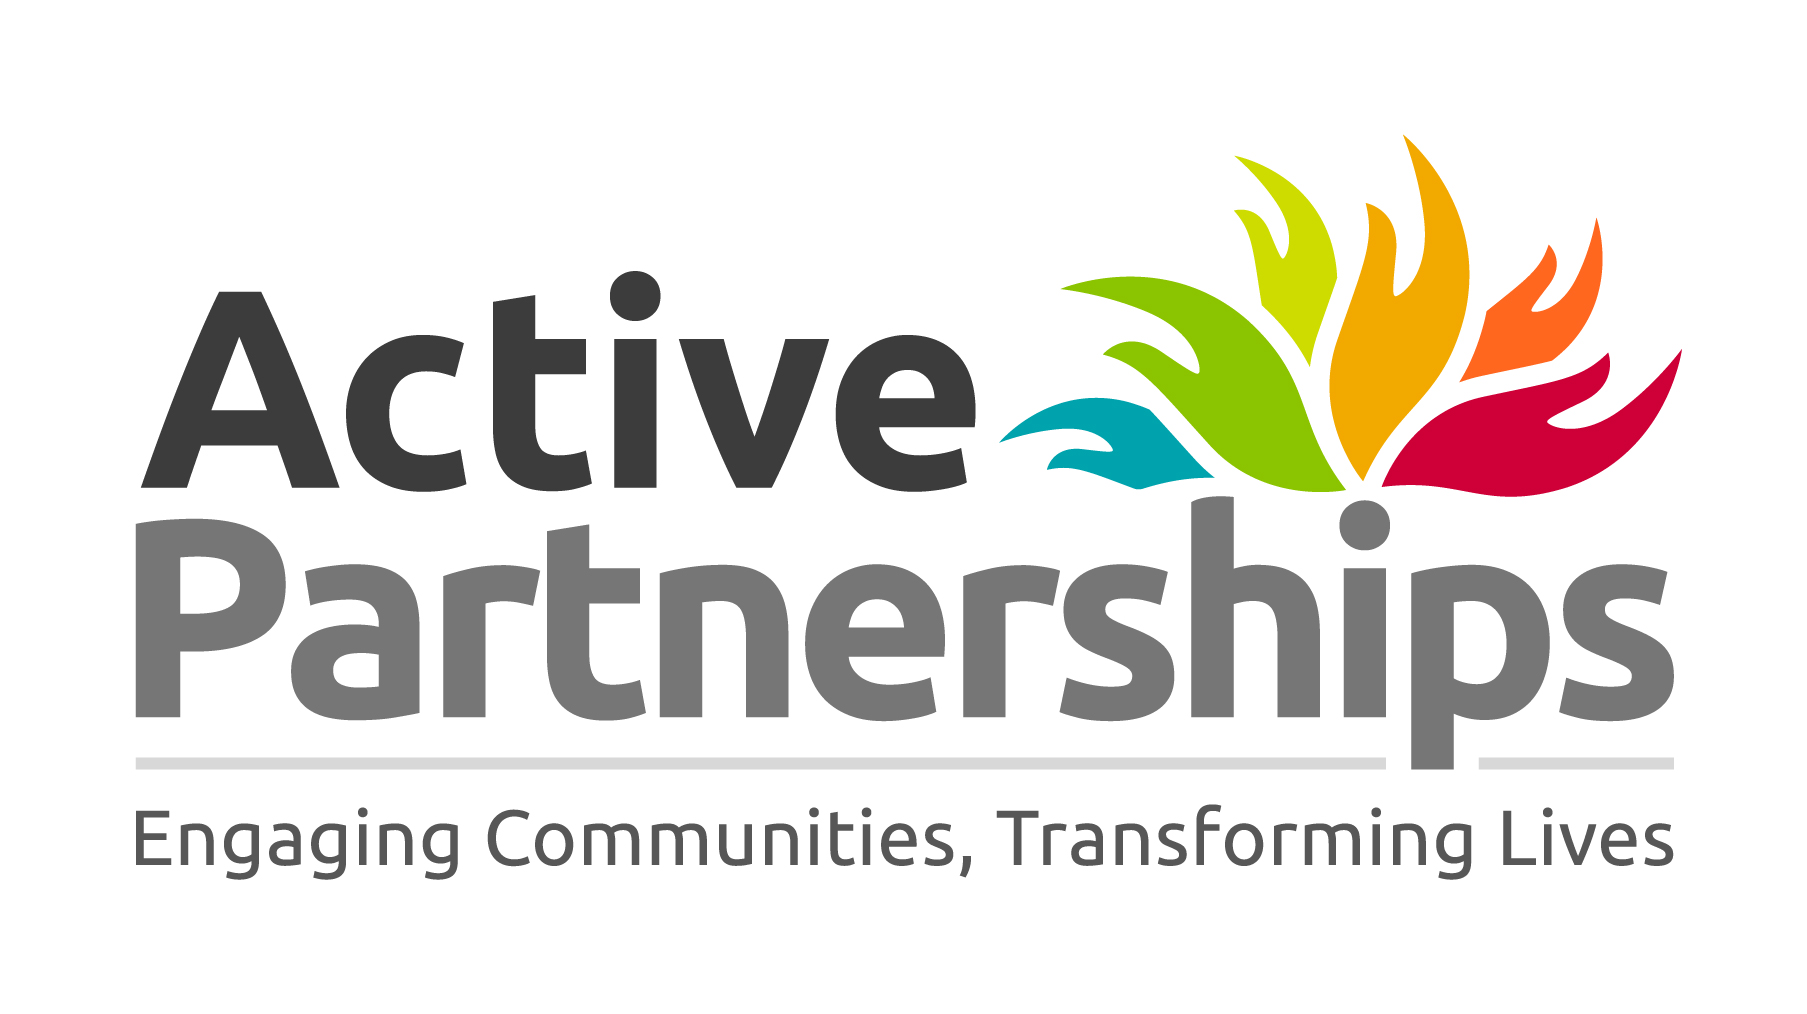 Introducing Active Partnerships; the new name for CSPs